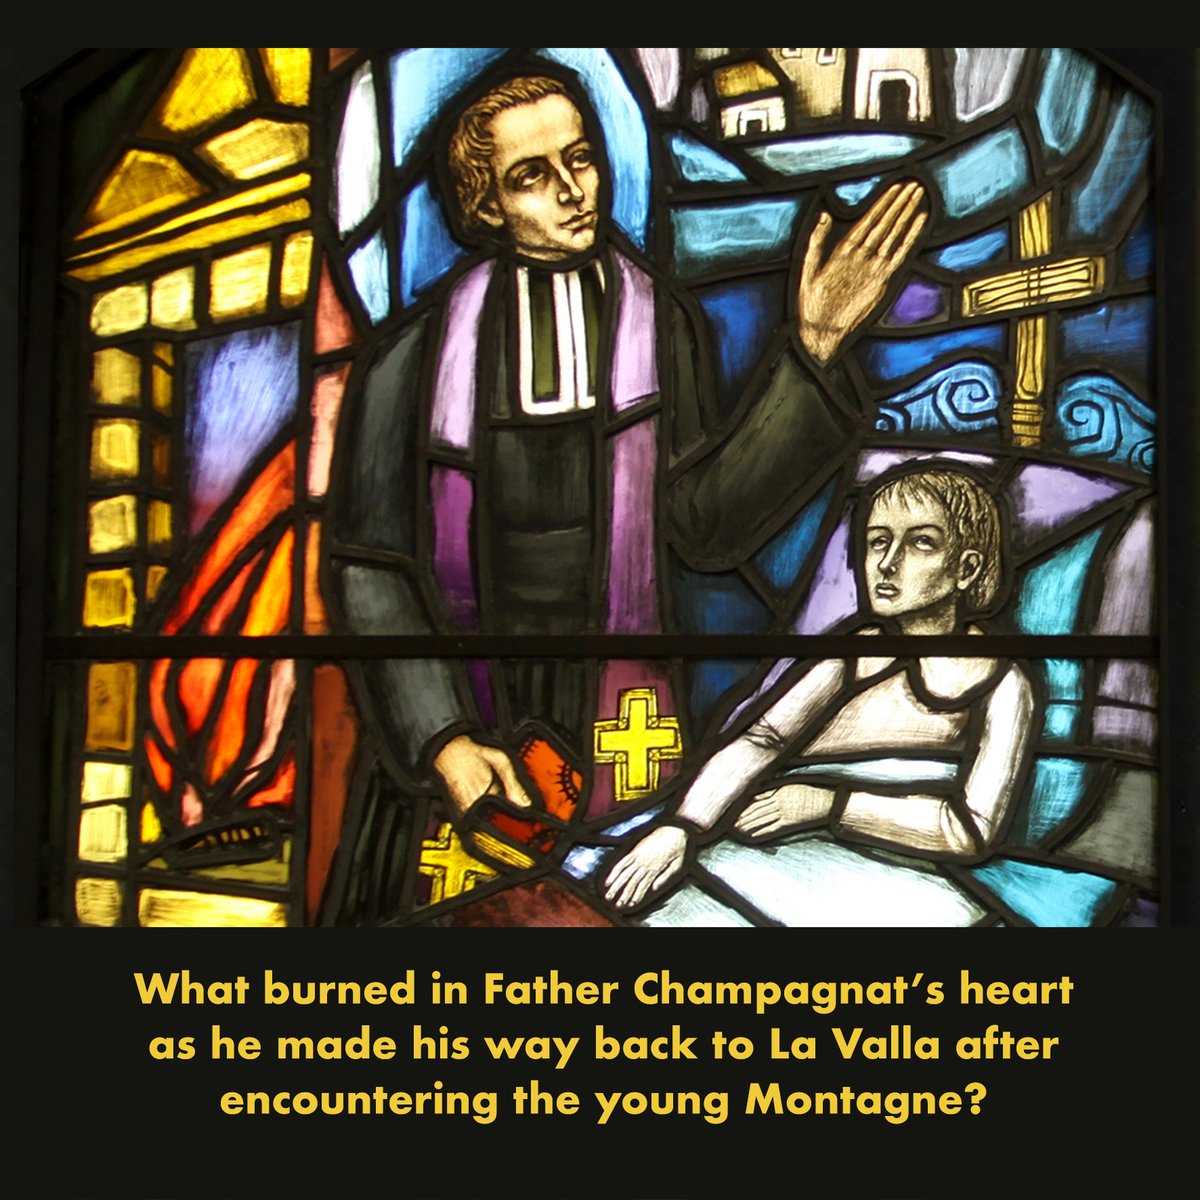 'What burned in Father Champagnat’s heart as he made his way back to La Valla after encountering the young Montagne? What energy pulsed through him, leading him to found the Institute #MaristsOfChampagnat just a few months later?' (@etfms)